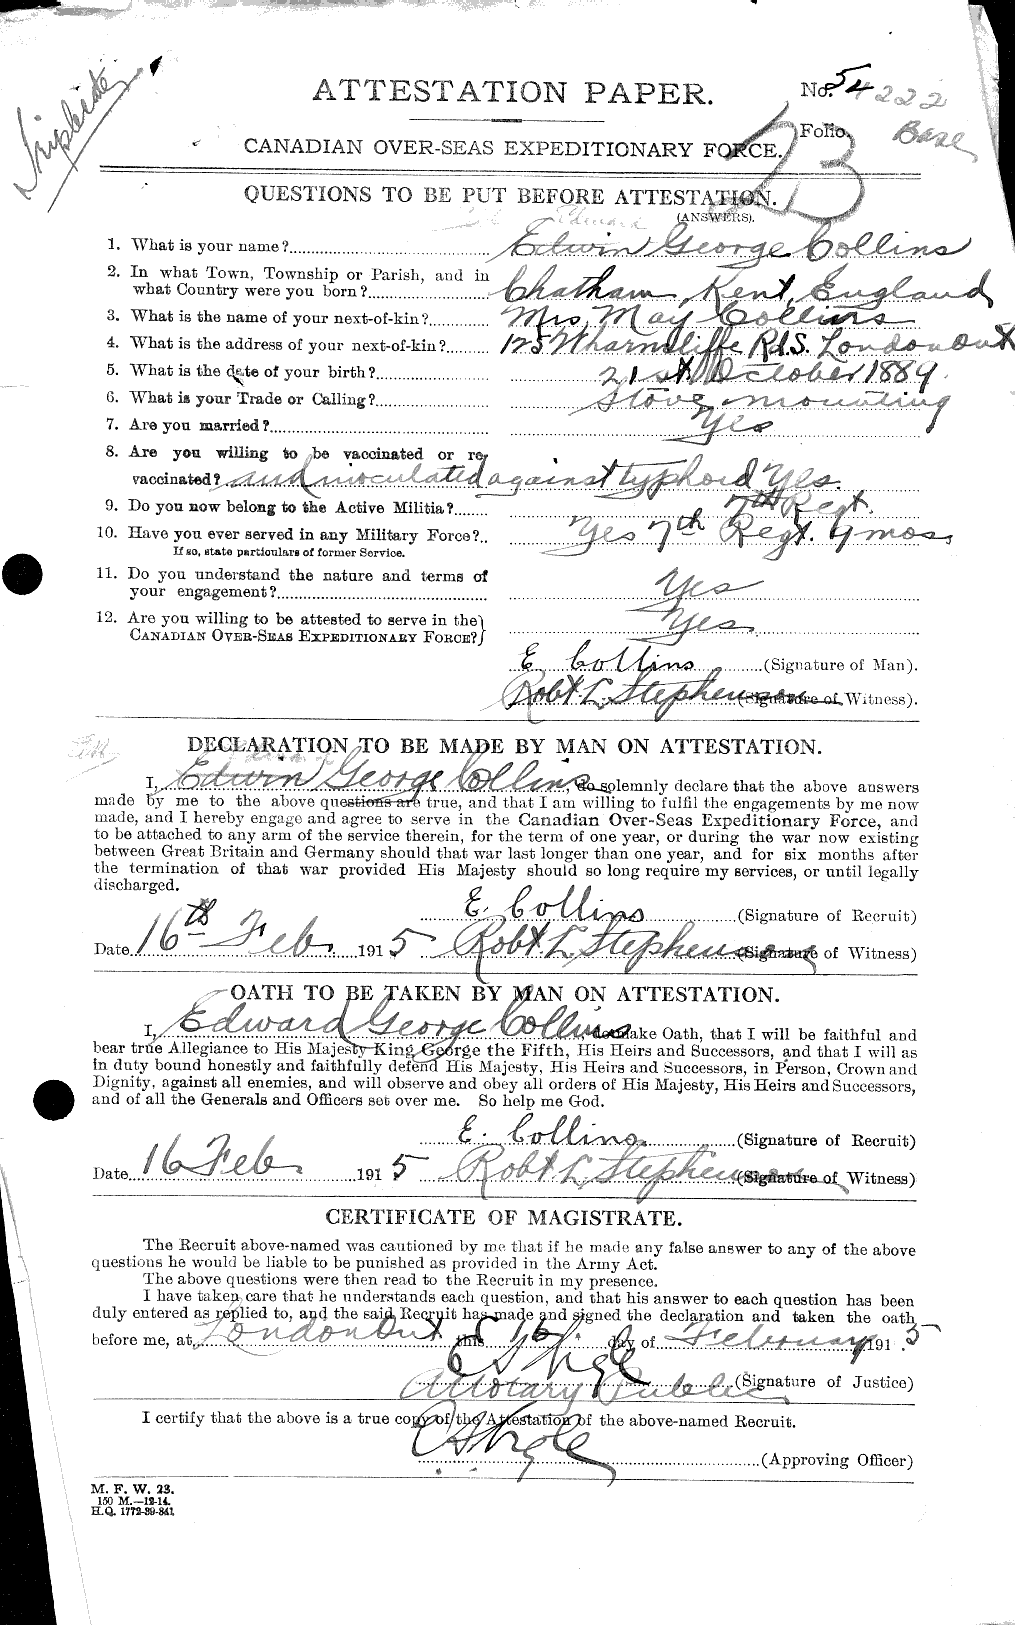 Personnel Records of the First World War - CEF 037749a